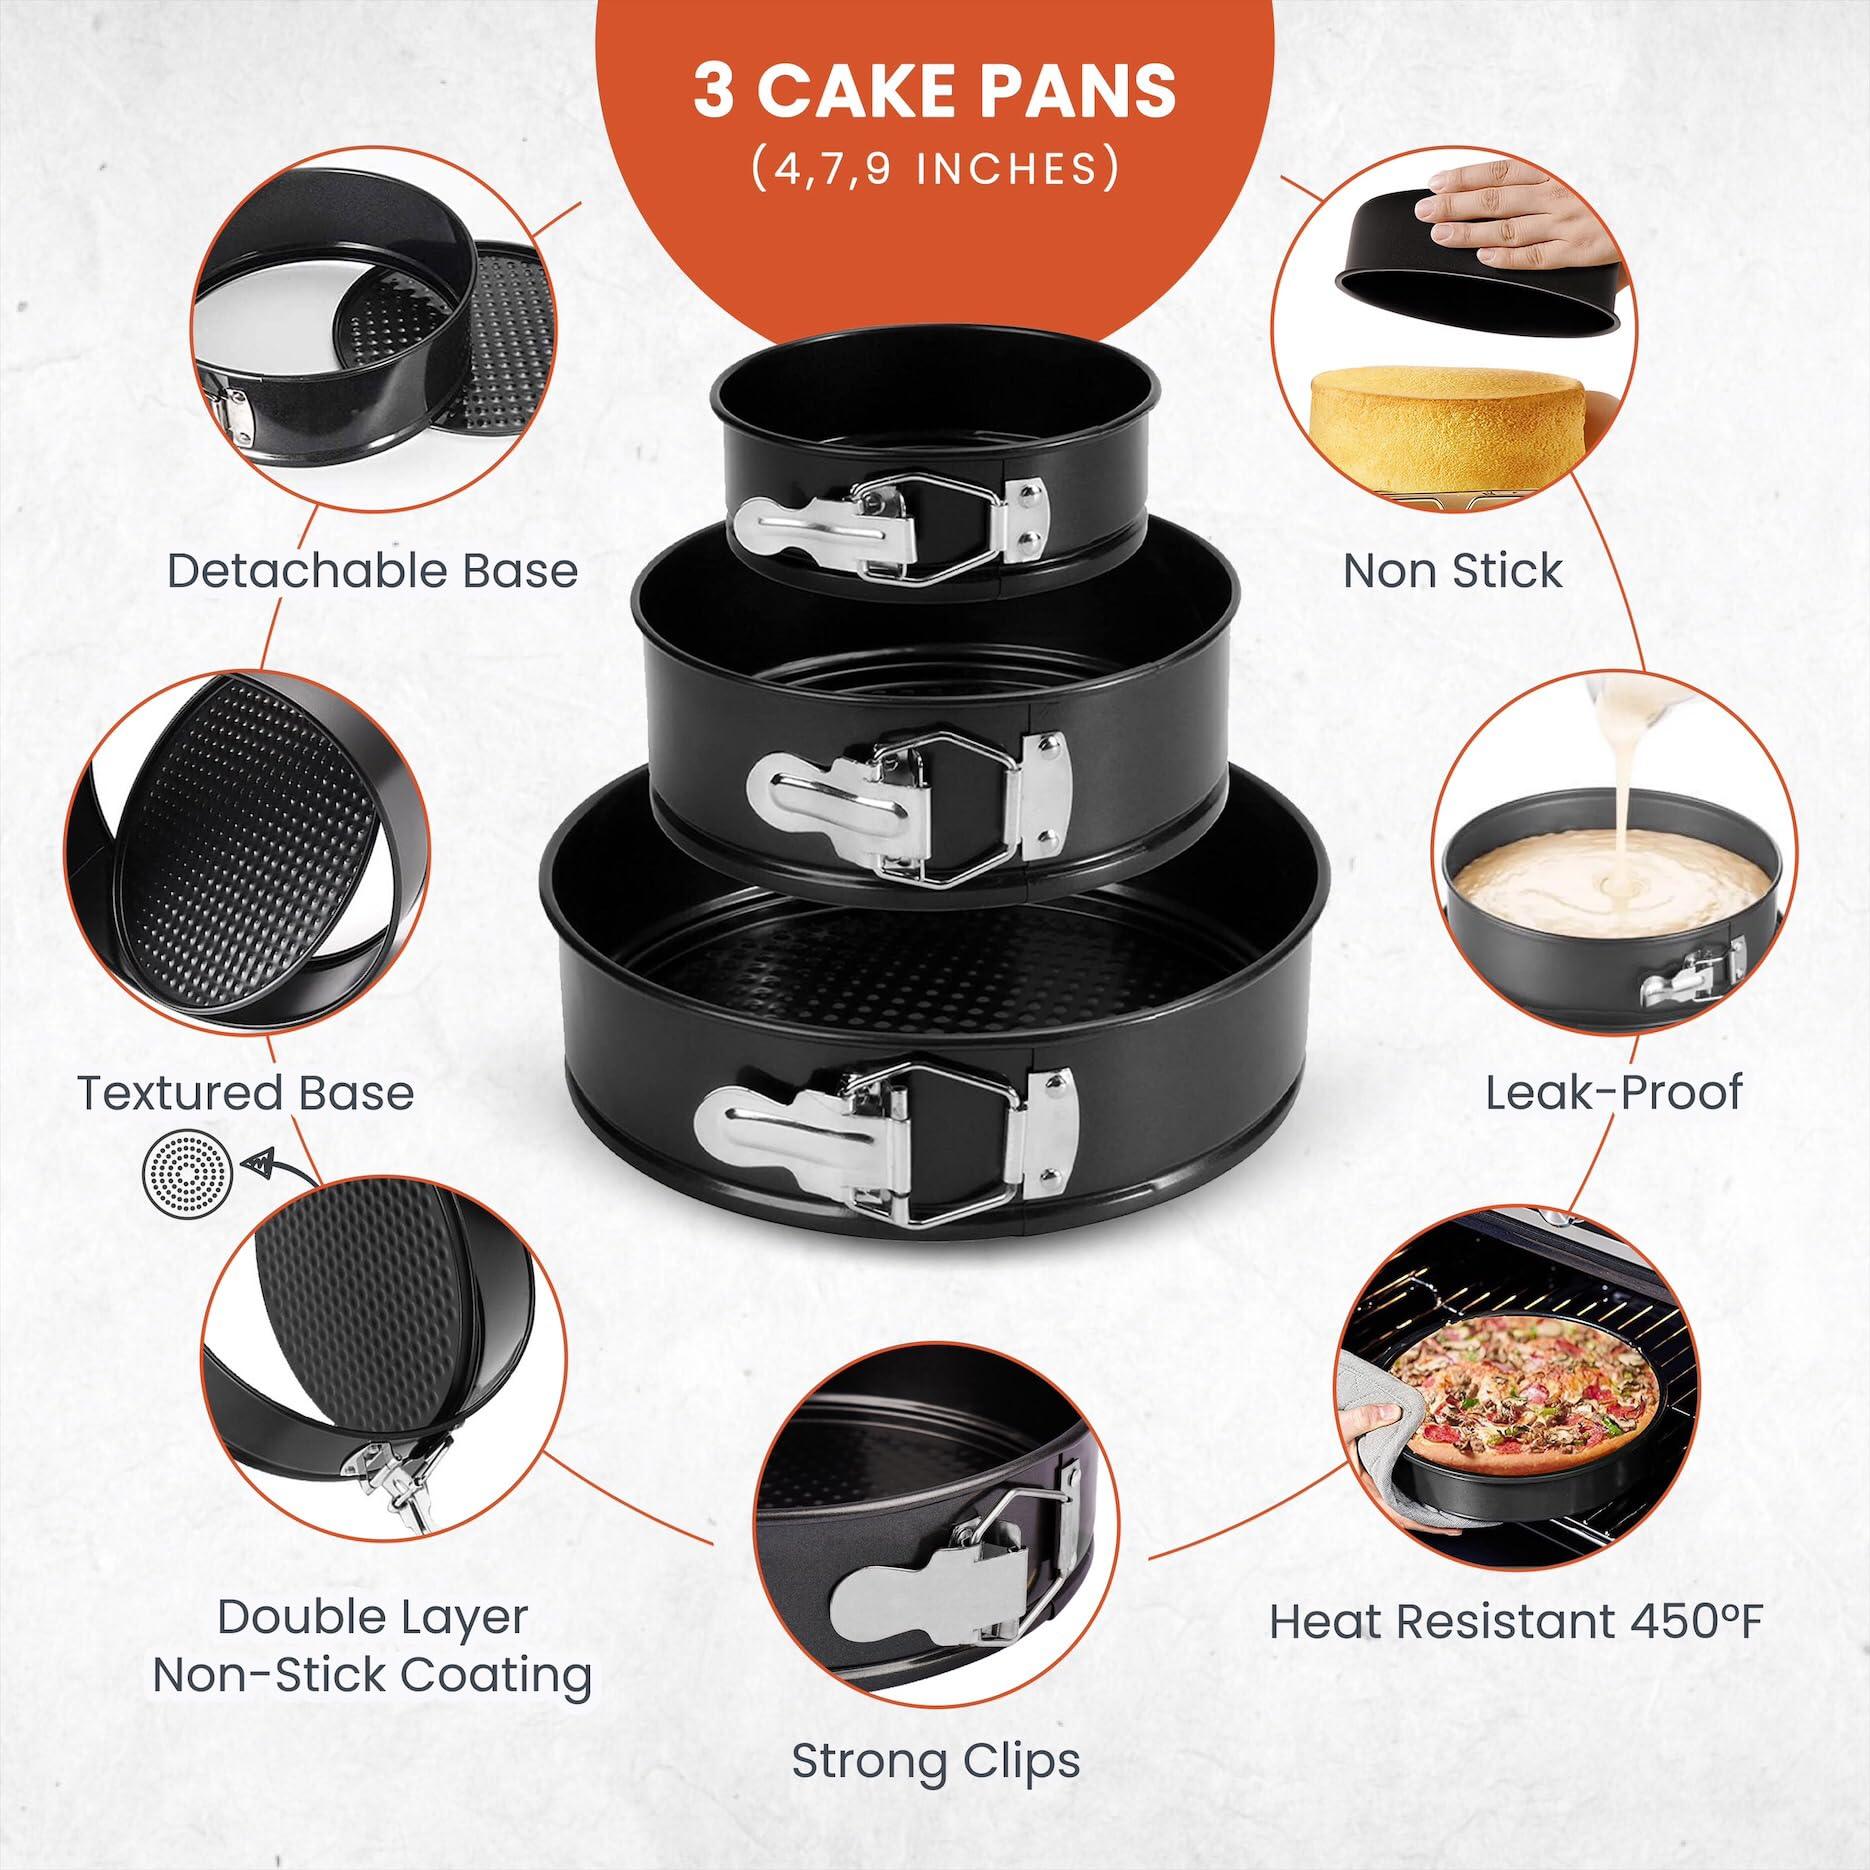 RFAQK Springform Pan Set of 3 (4”/7”/9”) Cake Pans Sets for Baking -Nonstick Leakproof 3 Tier Cake Pan Bakeware with 50 Pcs Parchment Paper Liners for Small, Medium, and Large Shape Cakes with Ebook - CookCave